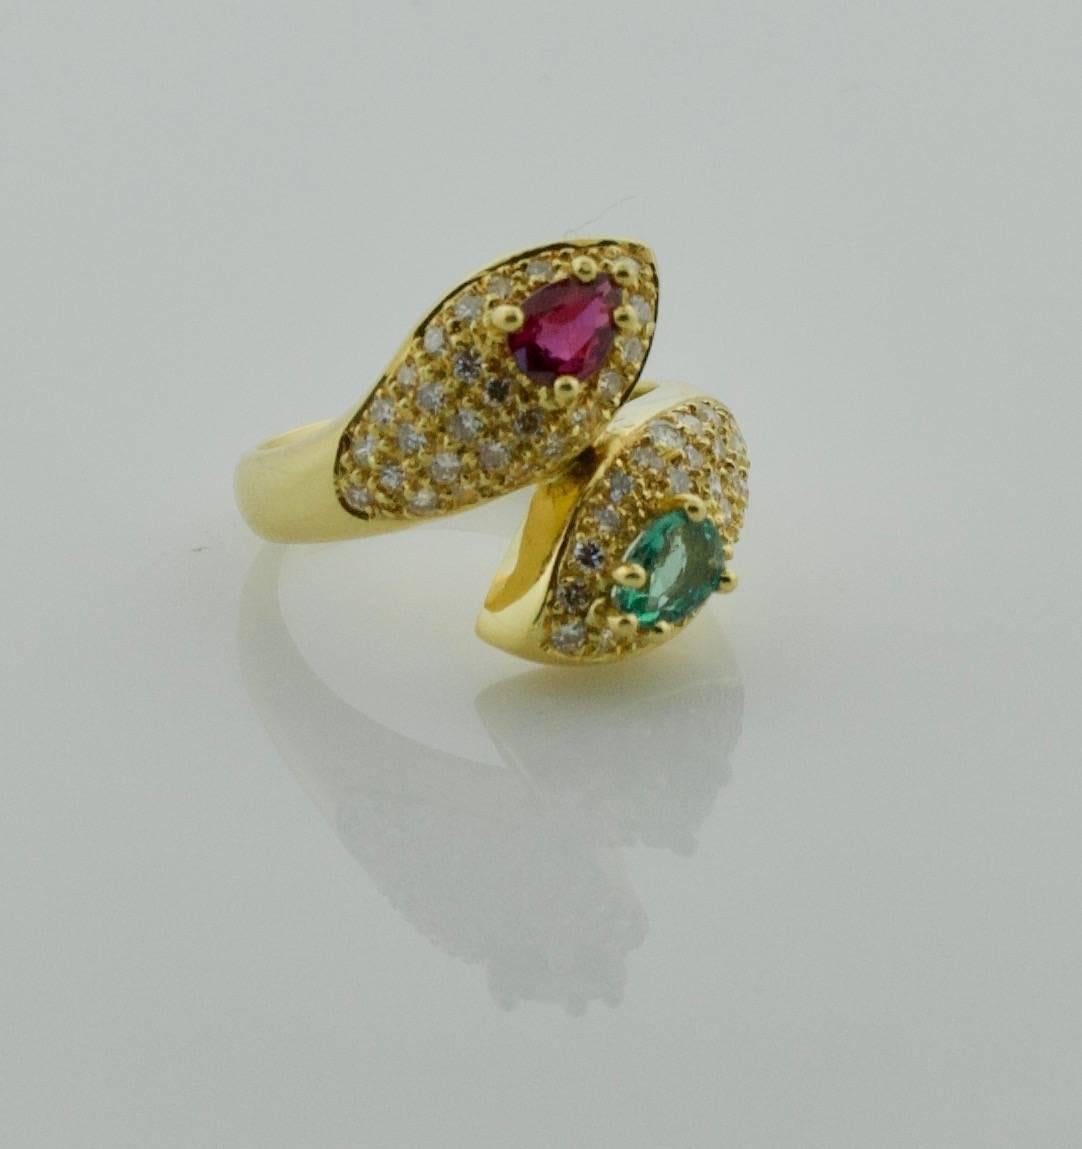 Ruby, Emerald and Diamond Crossover Ring in18k Yellow Gold
One Pear Shape Ruby weighing .55 carats approximately
One Pear Shape Emerald weighing .40 carats approximately
Fifty Five Round Brilliant Cut Diamonds weighing 1.05 carats approximately GH